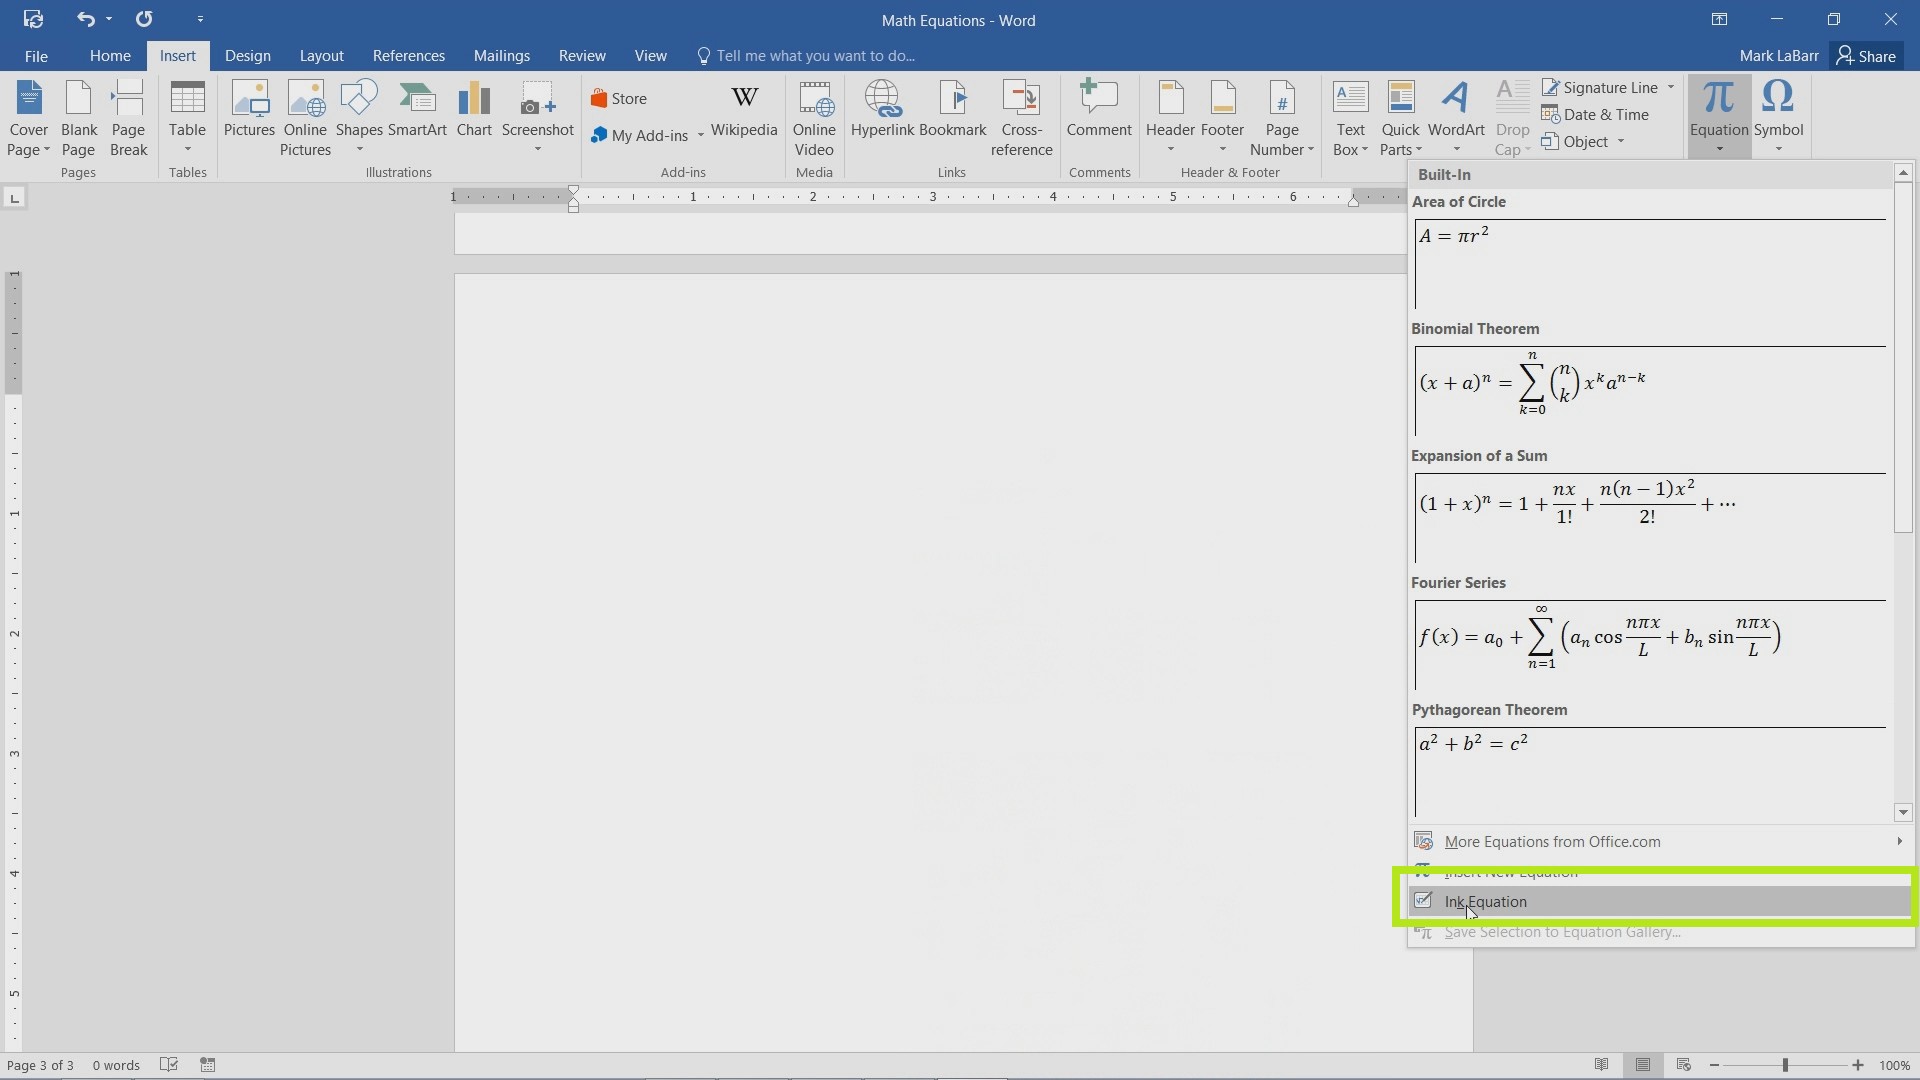 Create Equations in Word 2016